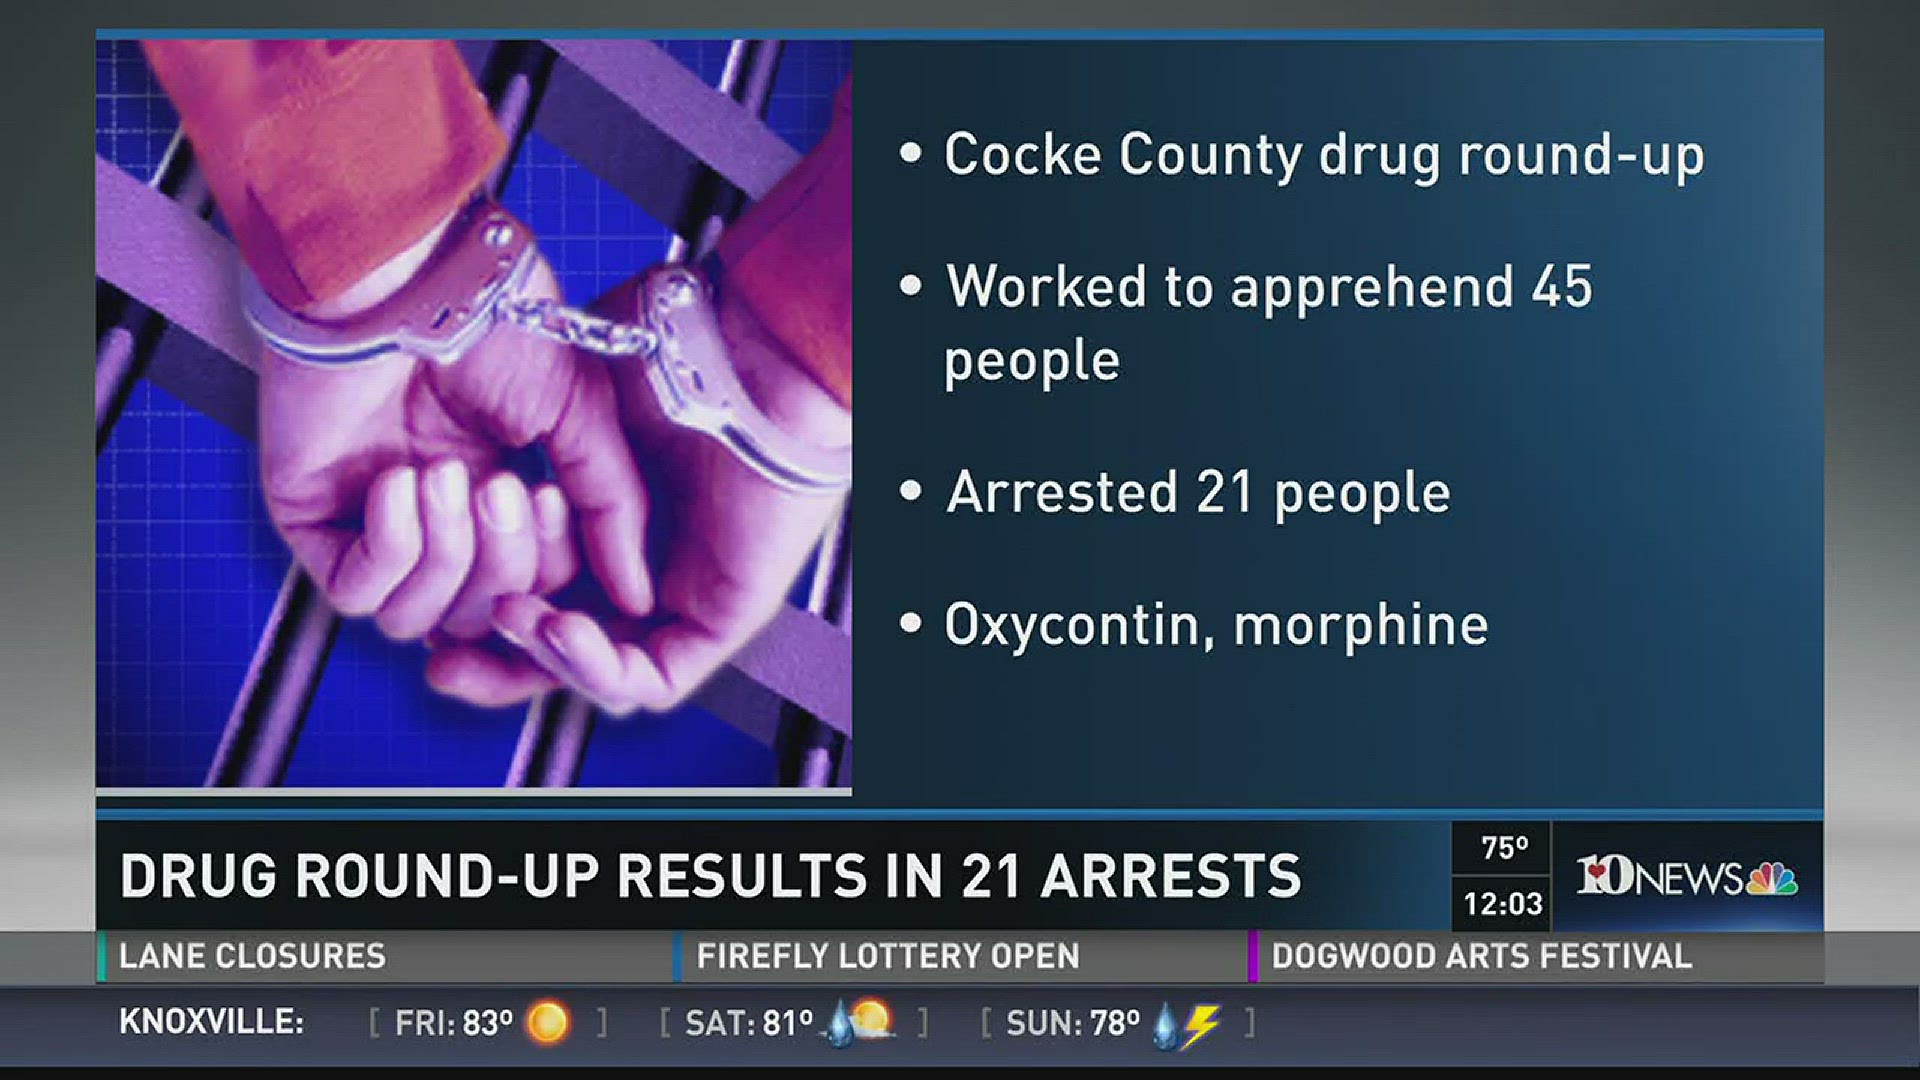 Authorities arrested 21 people in a Cocke County drug round-up